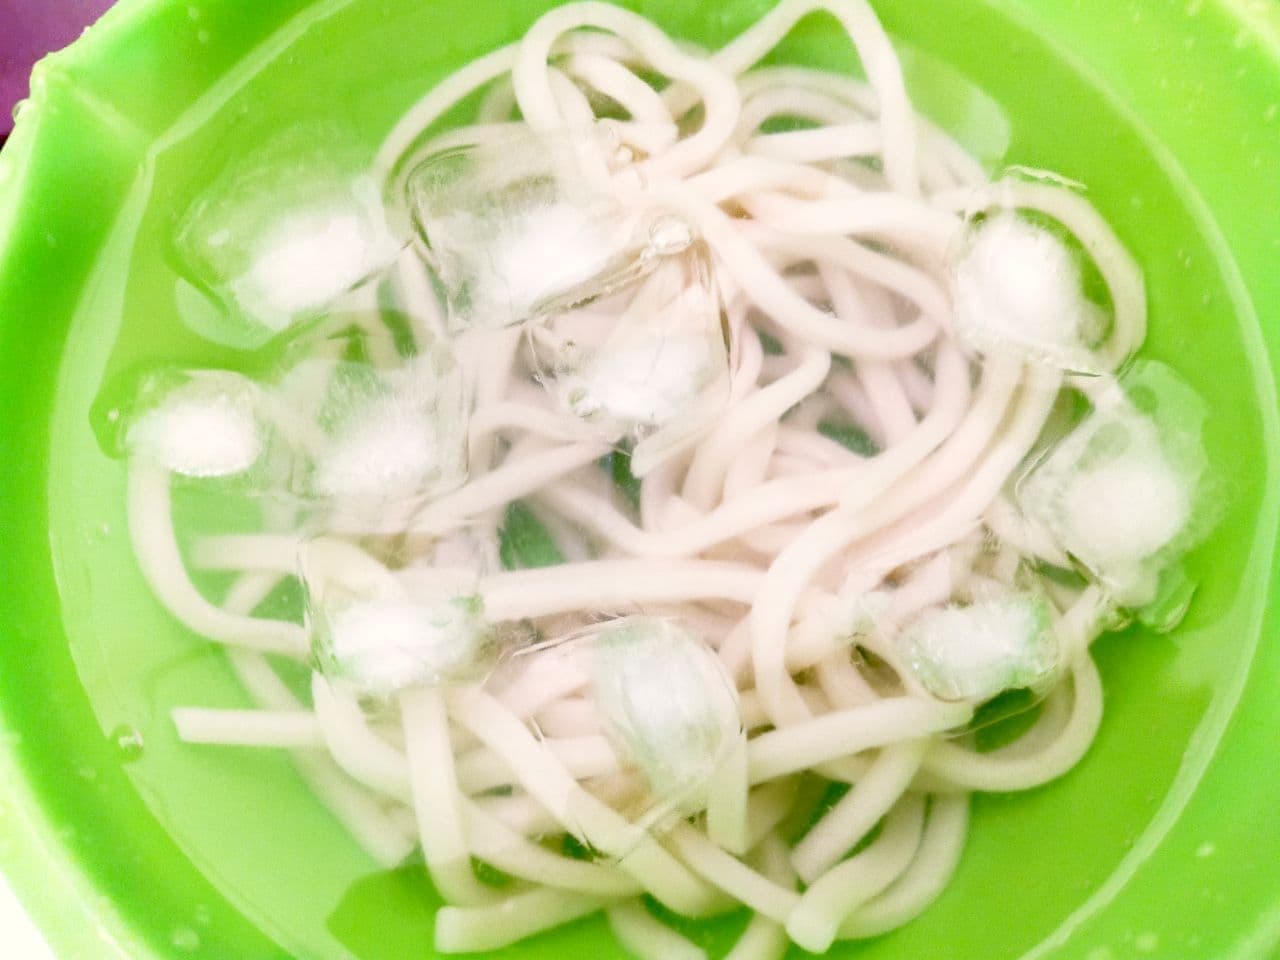 Step 3: How to defrost frozen udon noodles to make them sticky